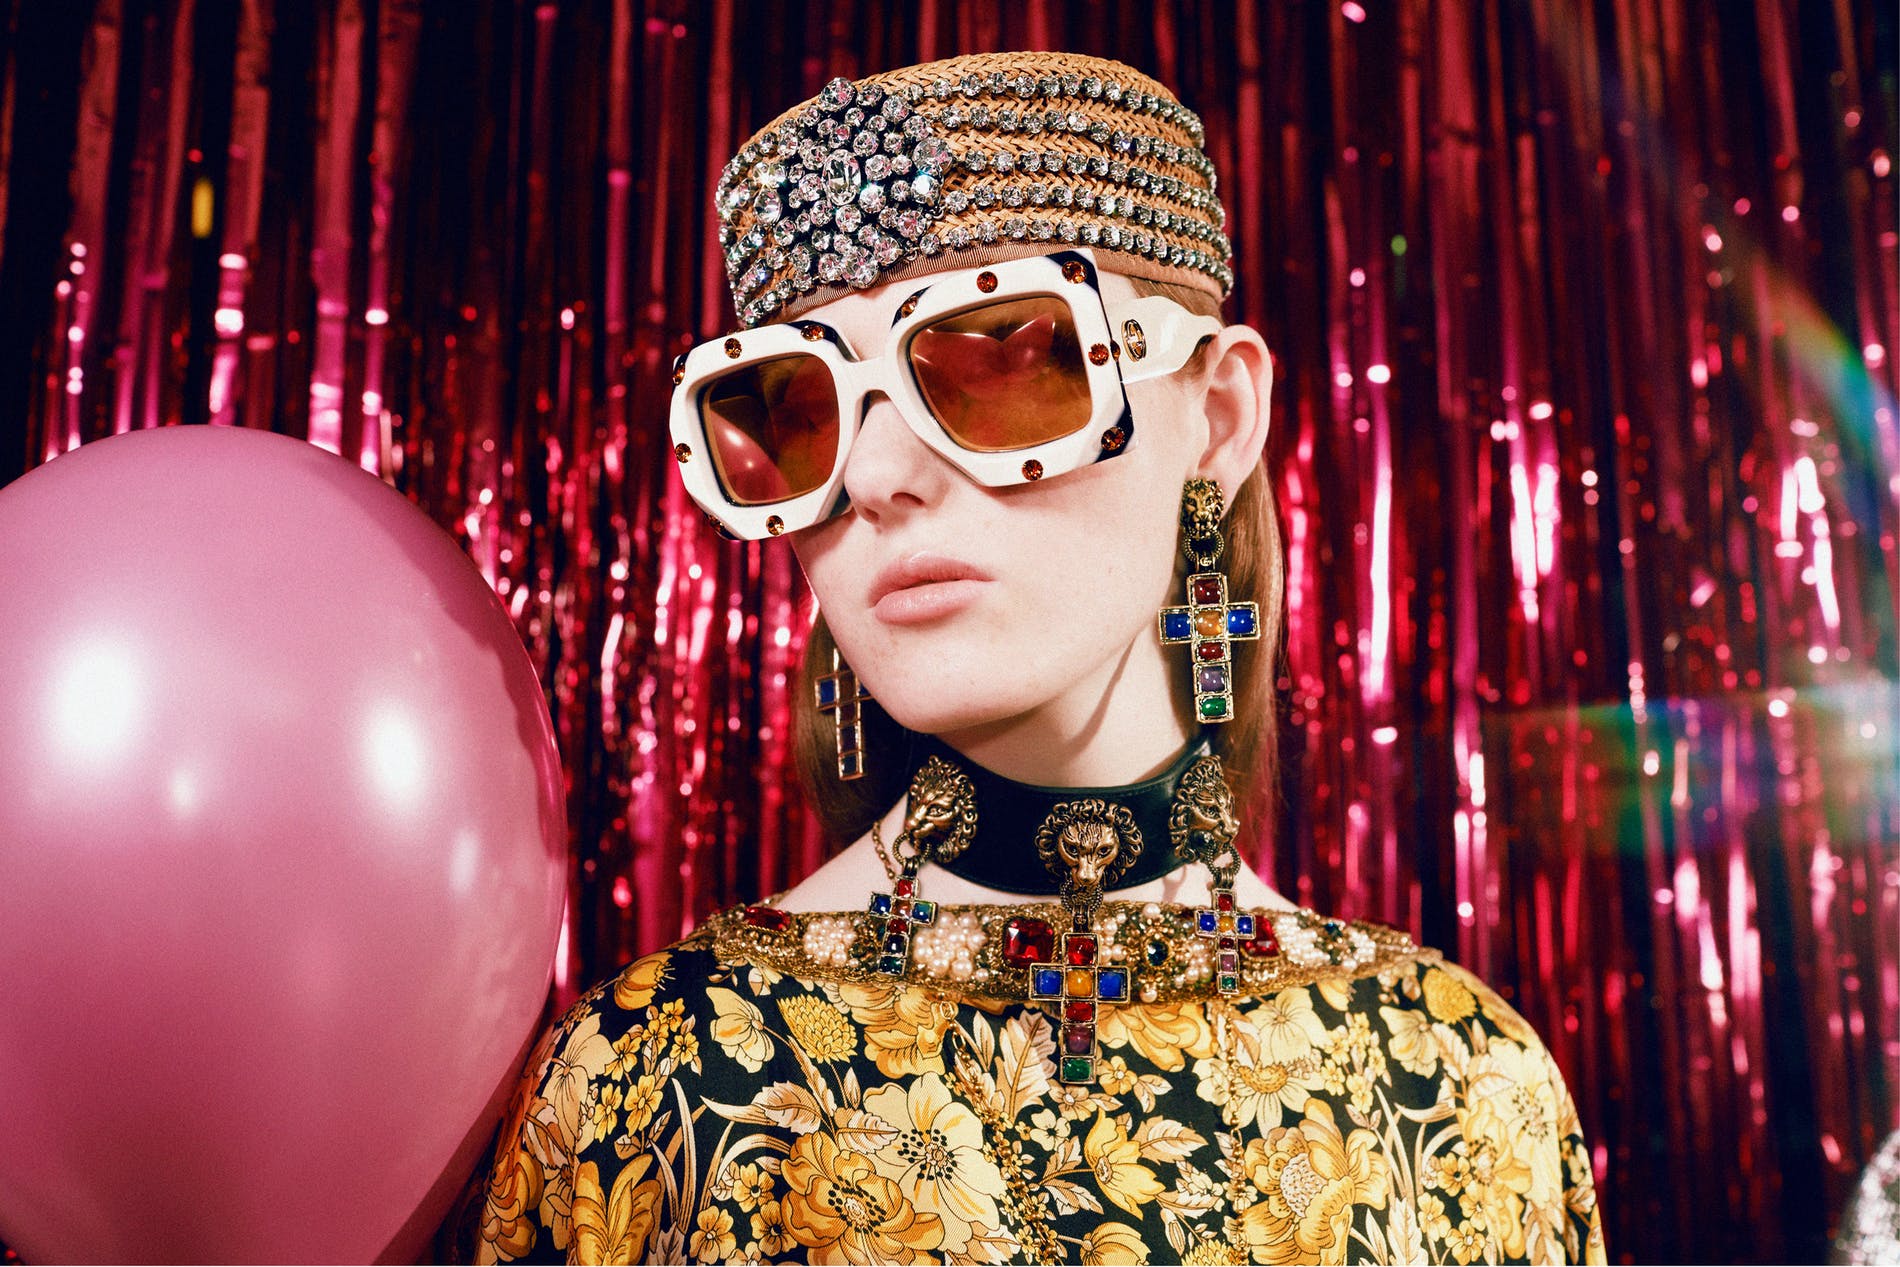 Watch now: Fashion holiday campaigns to kick off the festive season